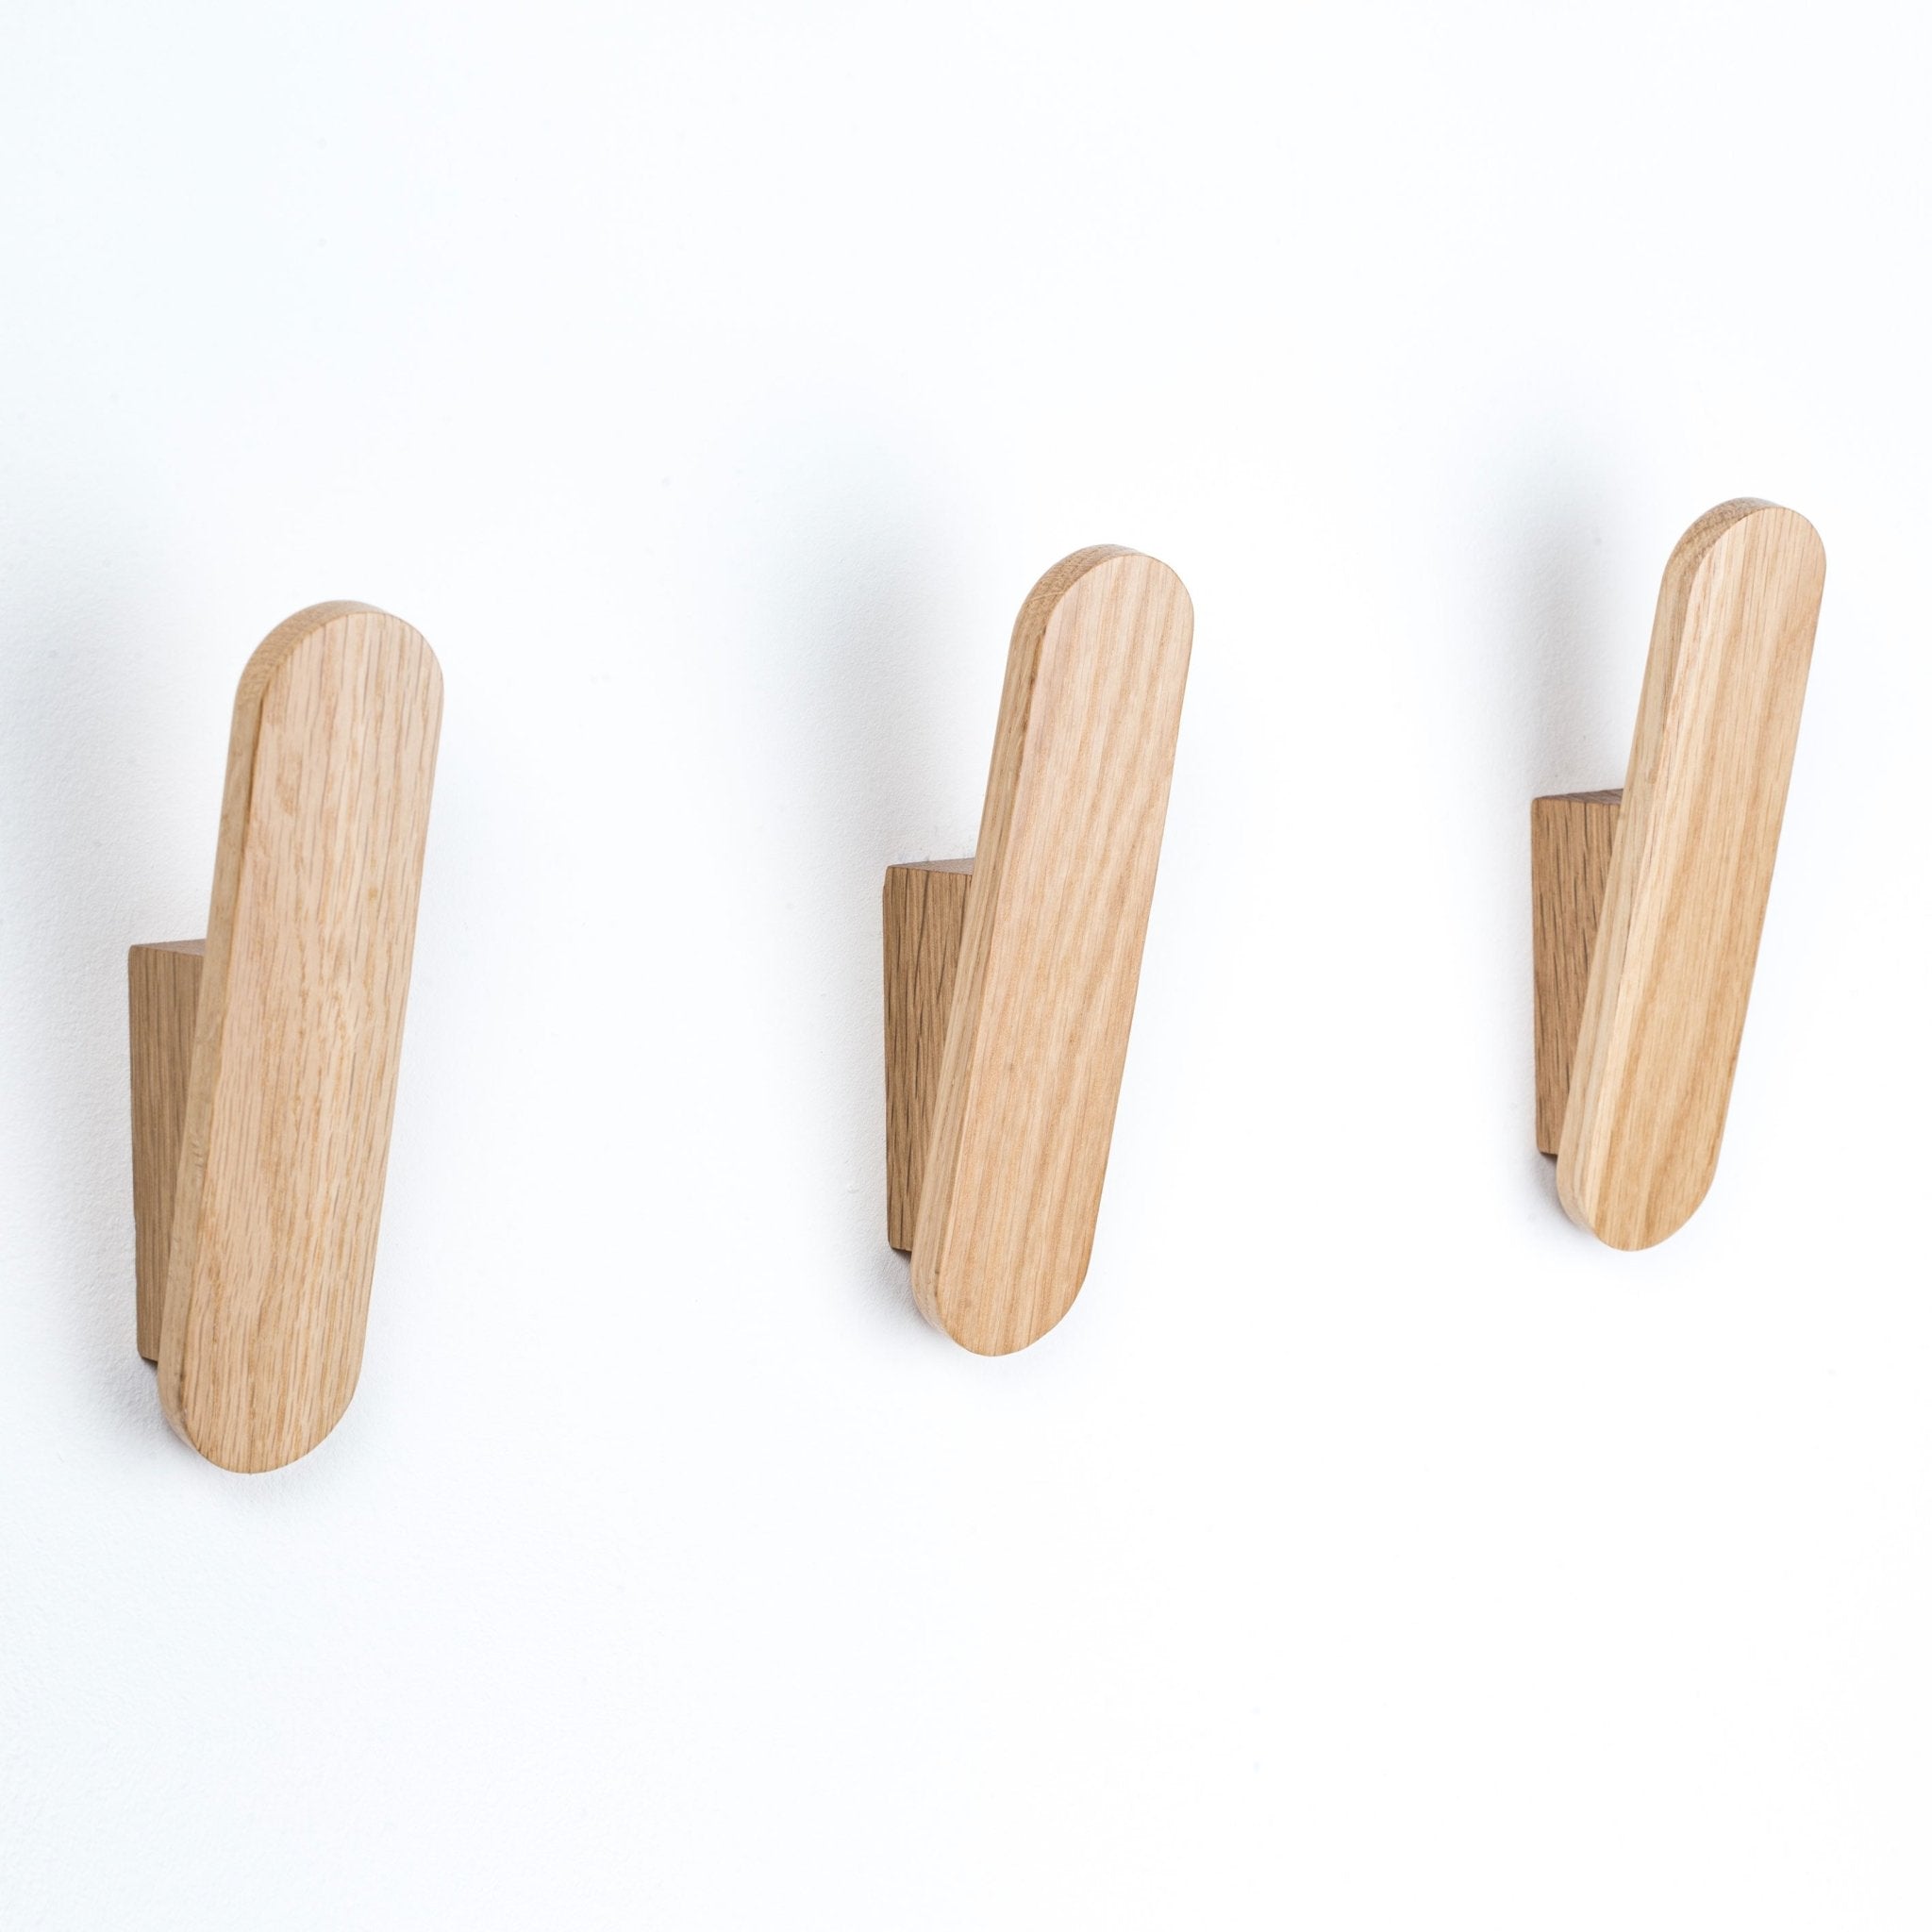 Tallo Single Wooden Wall Hooks, Made From Responsibly-Sourced Timber, Maple